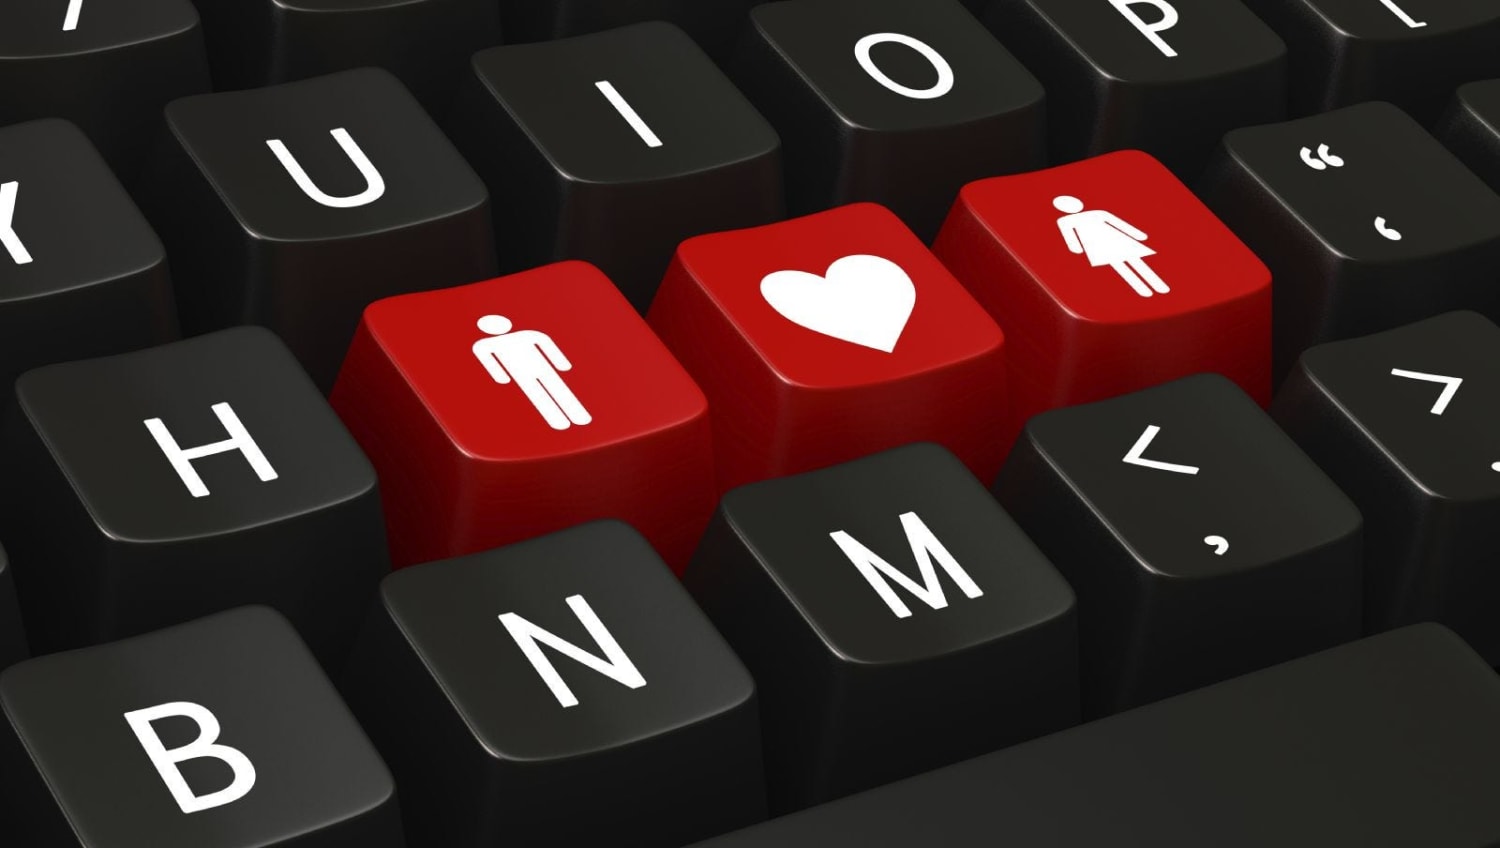 Online romance scams cost victims thousands. Read the story of one man who lost $31,000.